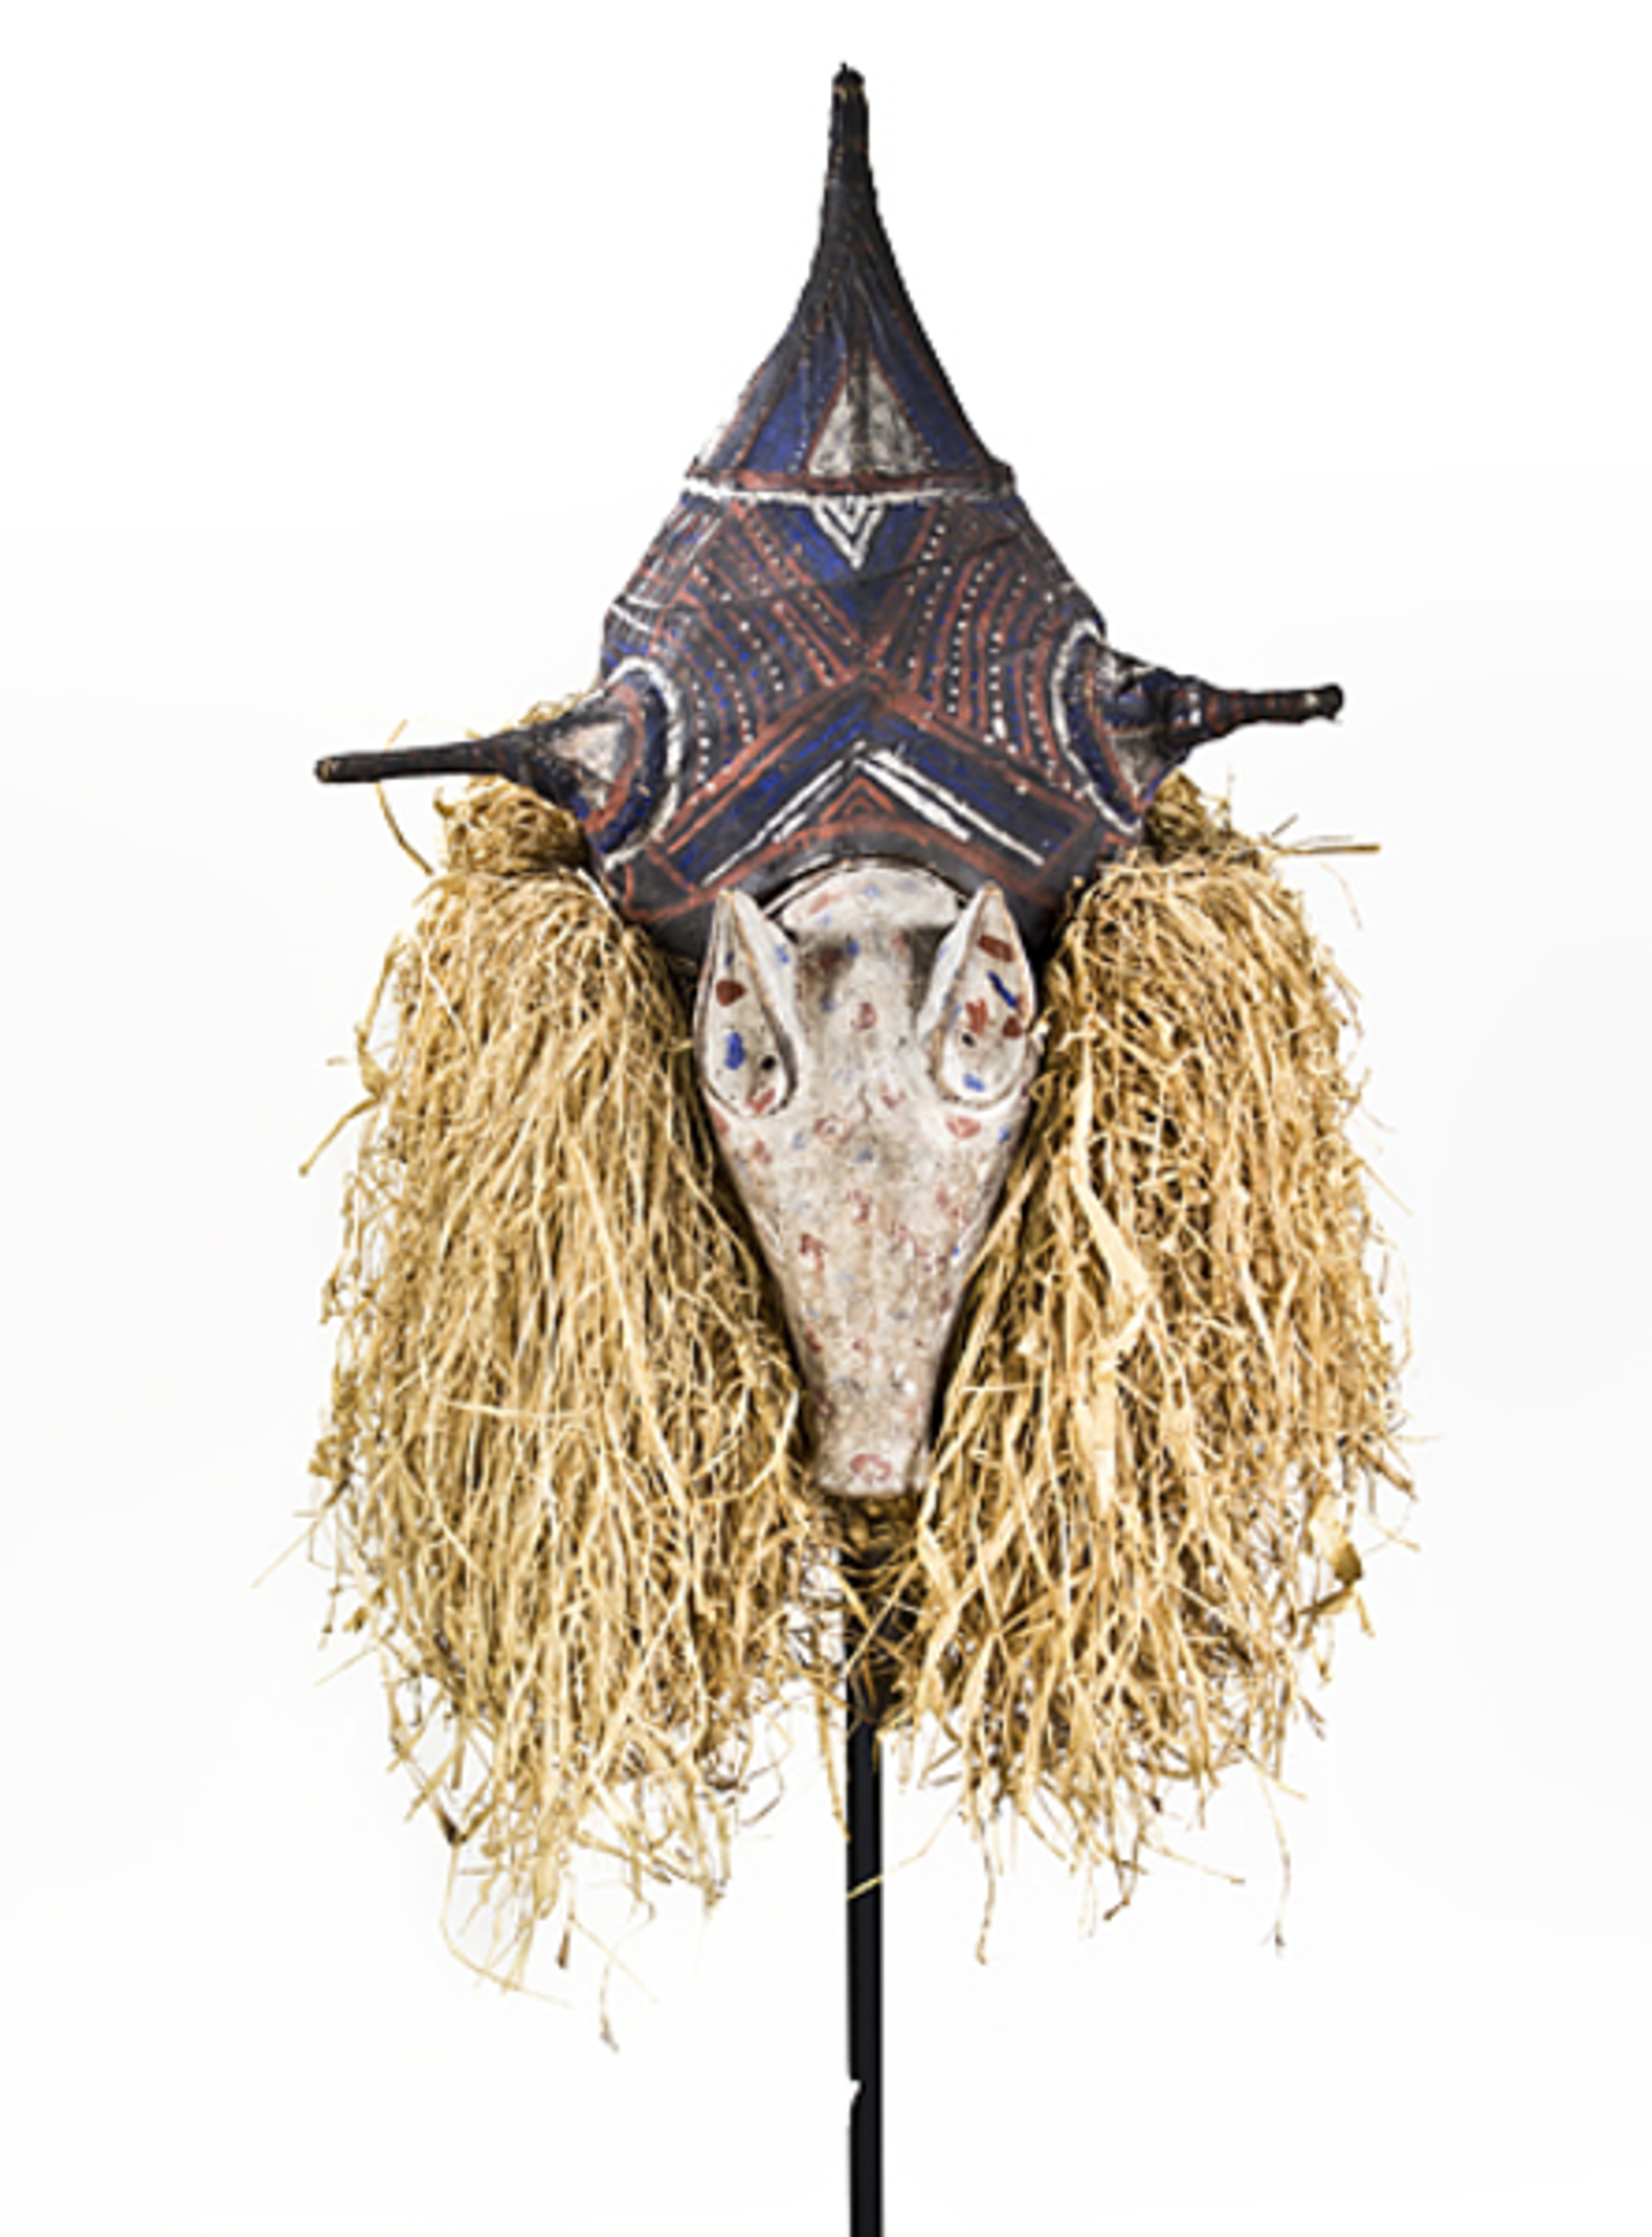 Yaka Mask Cermonial/Zaire by African